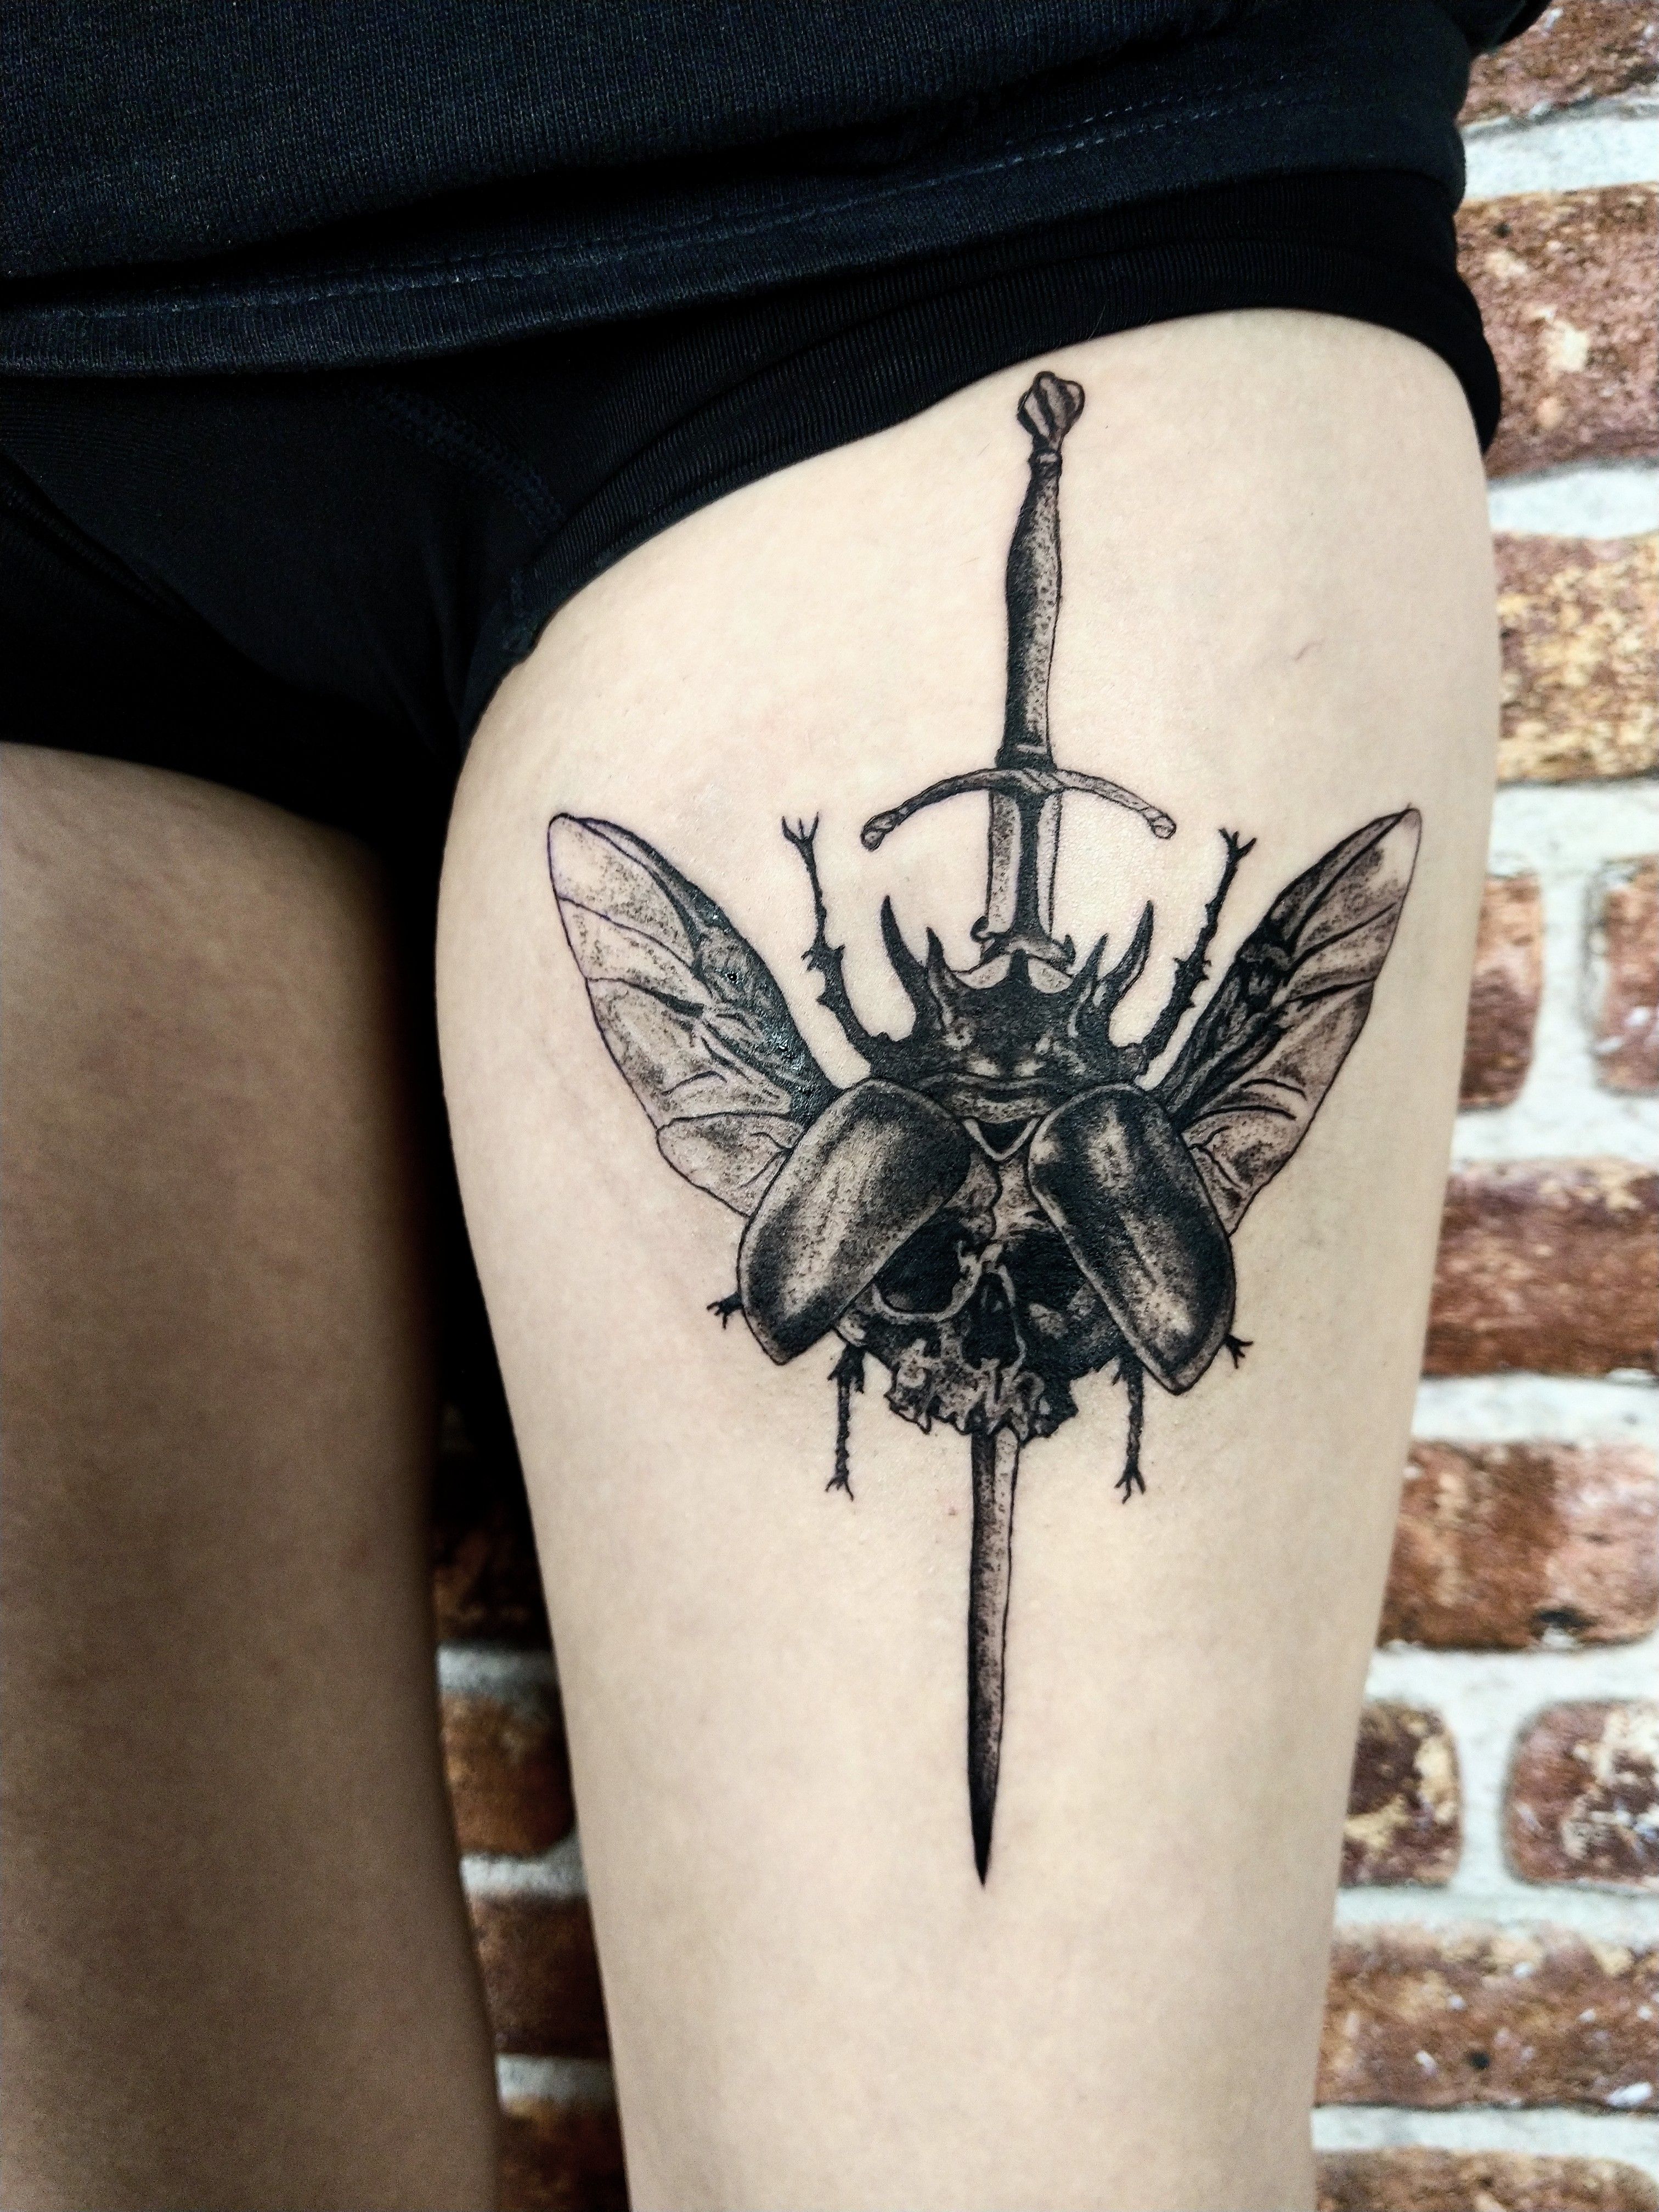 Beetle knee pit tattoo, had so much fun doing this one! @karrigan.ink ... |  TikTok